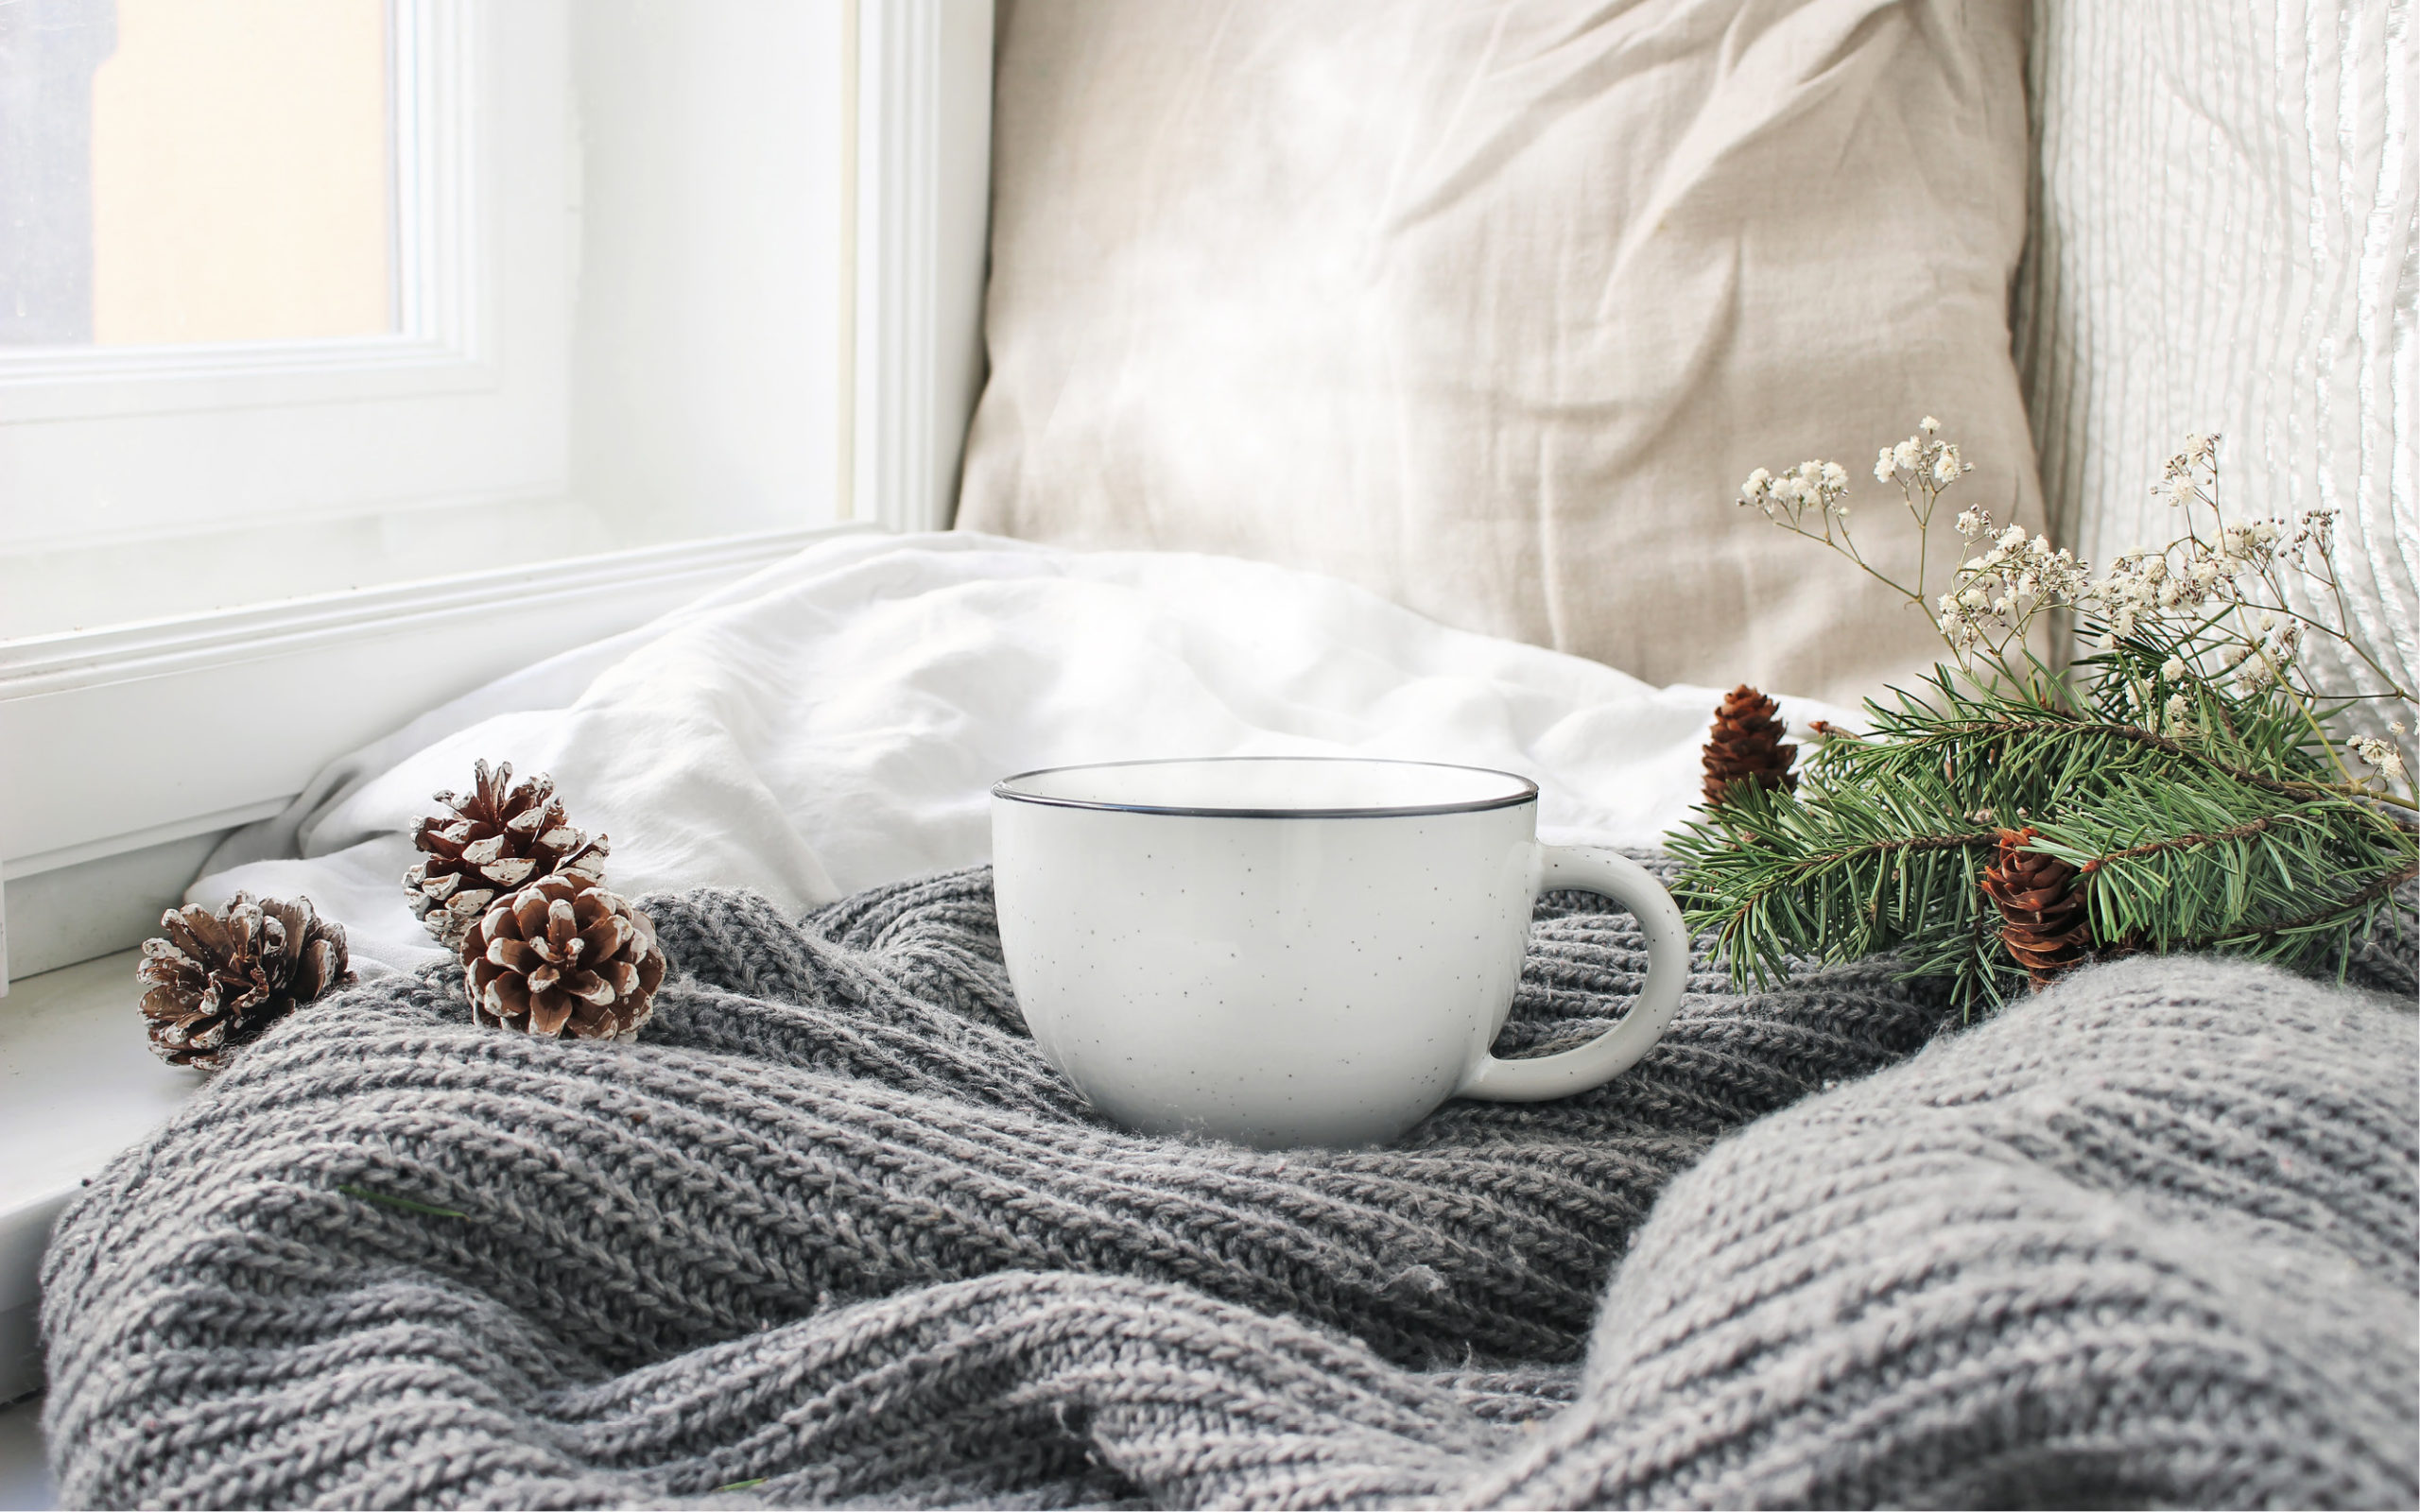 Coffee cup and cozy blanket